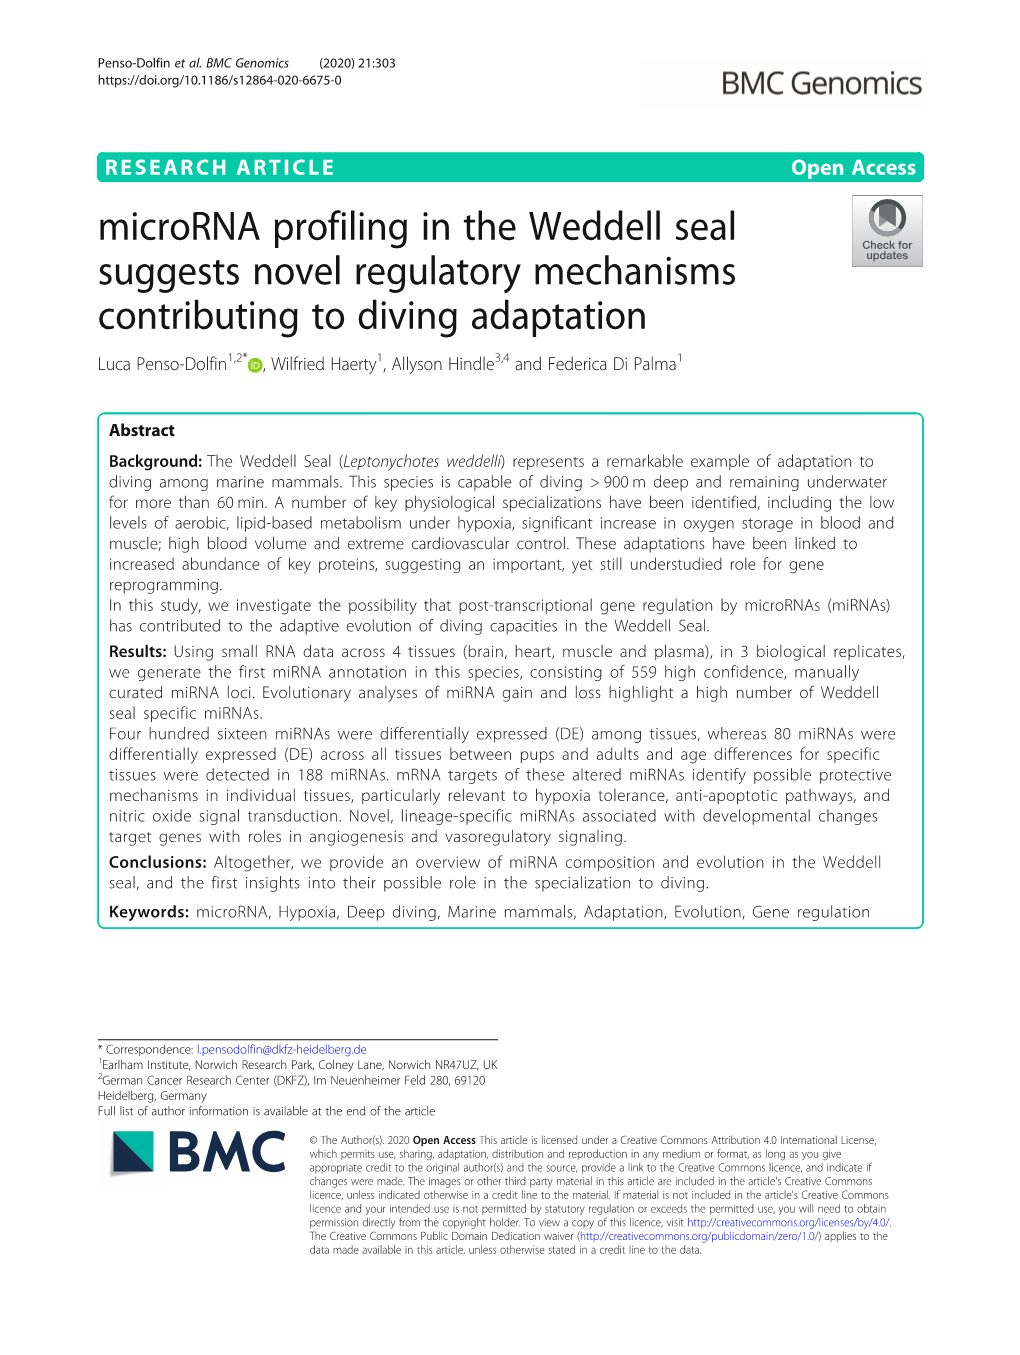 Microrna Profiling in the Weddell Seal Suggests Novel Regulatory Mechanisms Contributing to Diving Adaptation